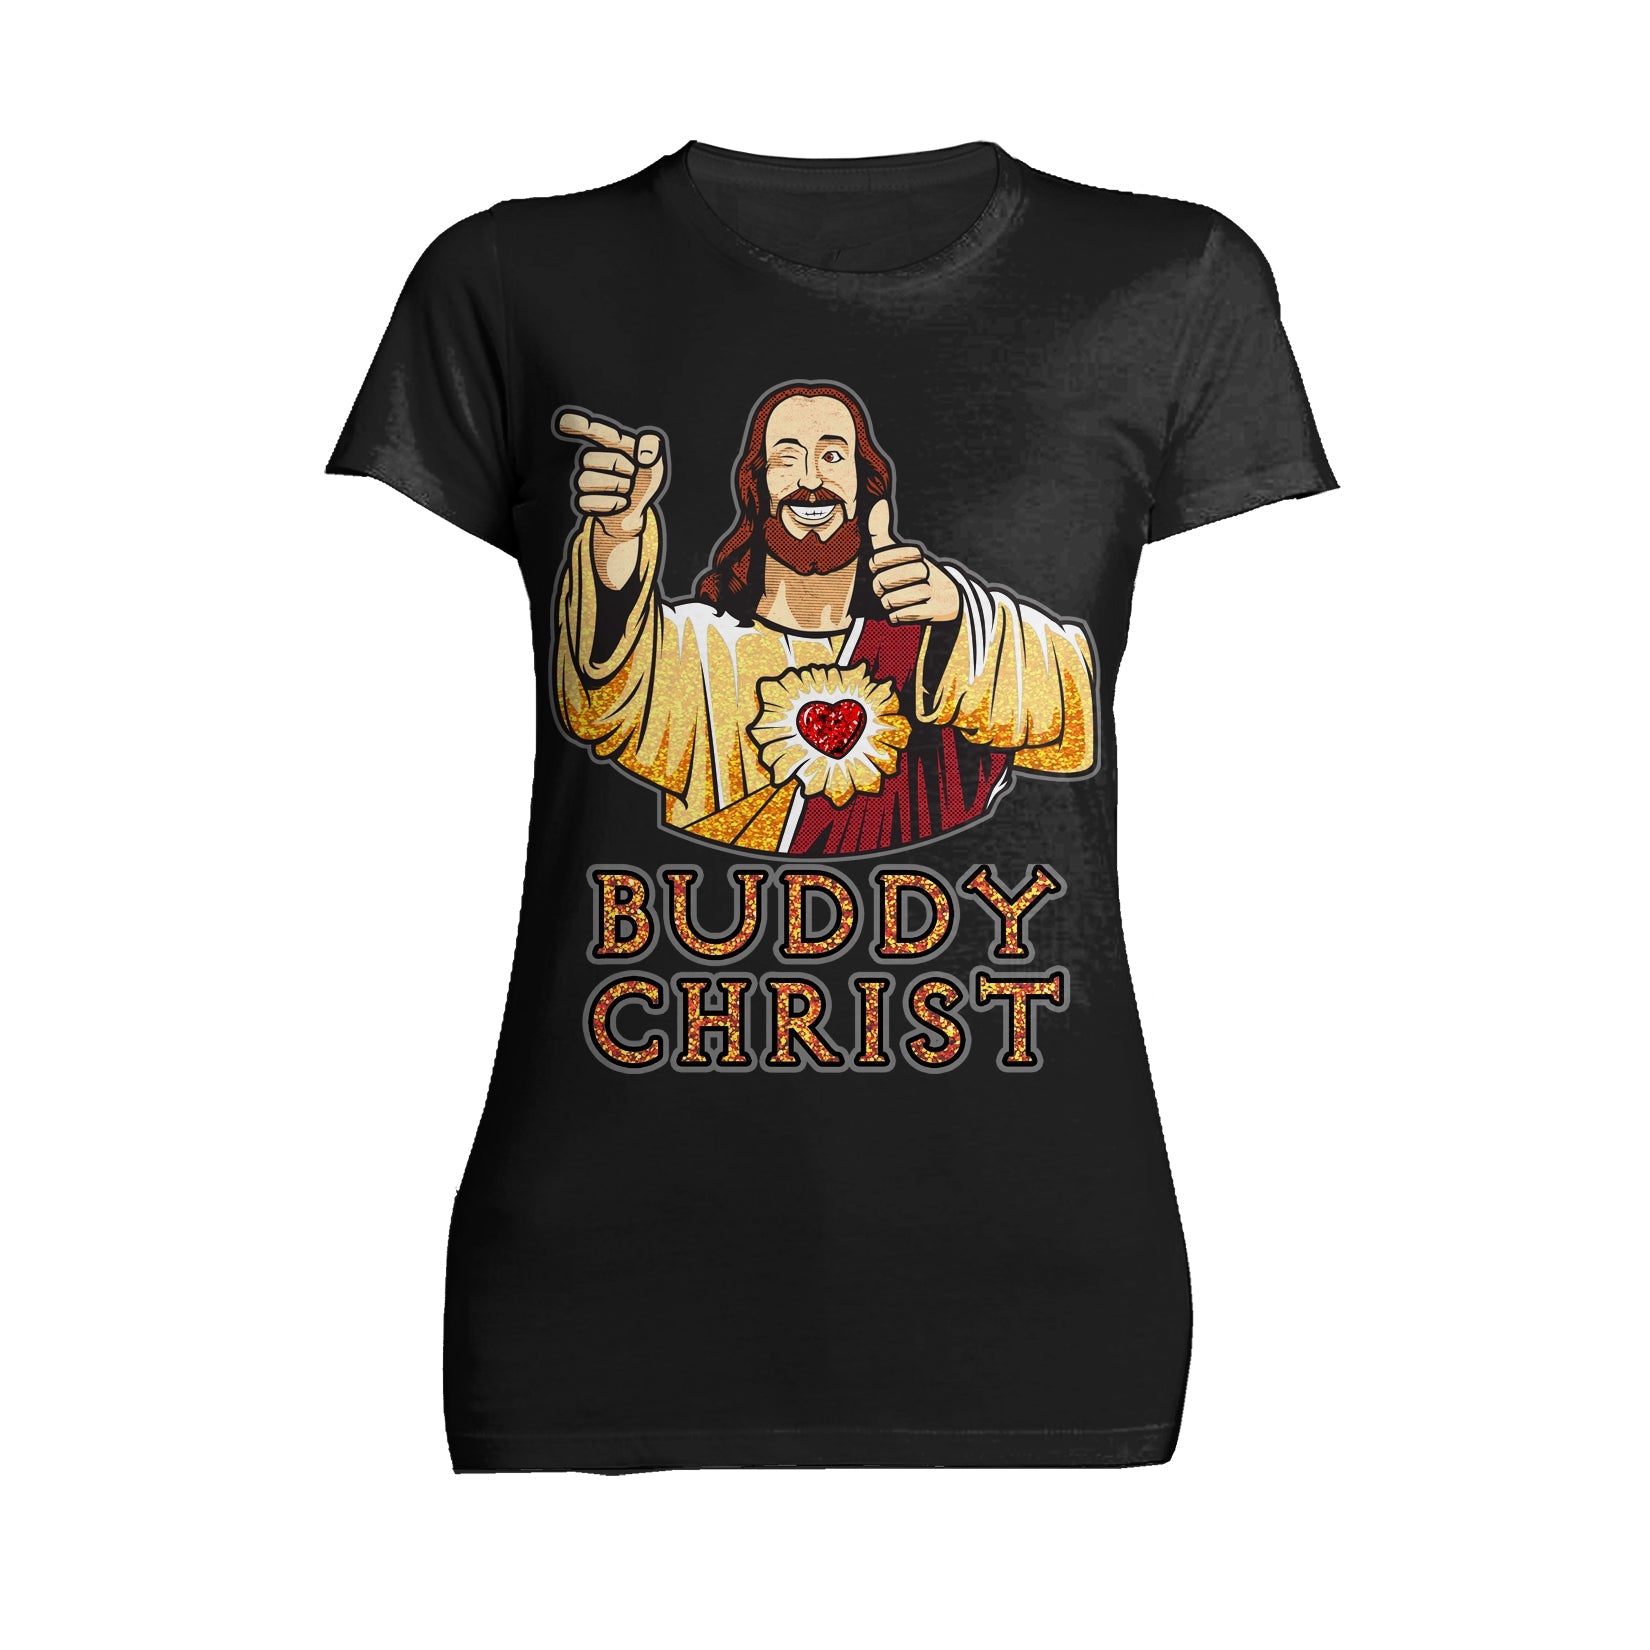 Kevin Smith View Askewniverse Buddy Christ Got Golden Wow Edition Official Women's T-Shirt